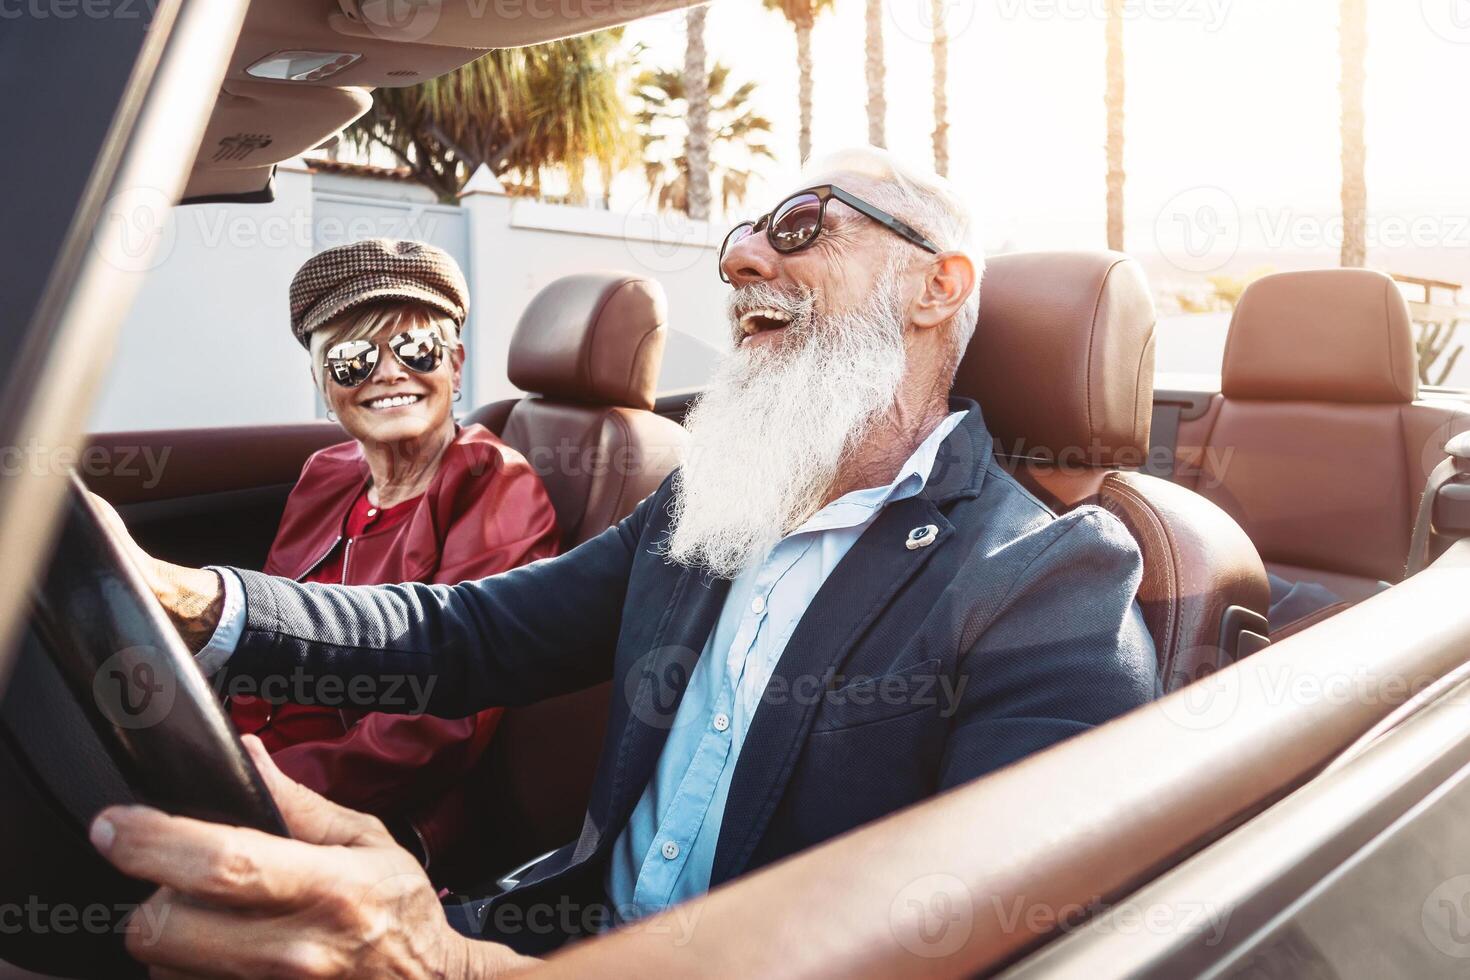 Happy senior couple having fun on new convertible car - Mature people enjoying time together during road trip vacation - Elderly lifestyle and travel transportation concept photo